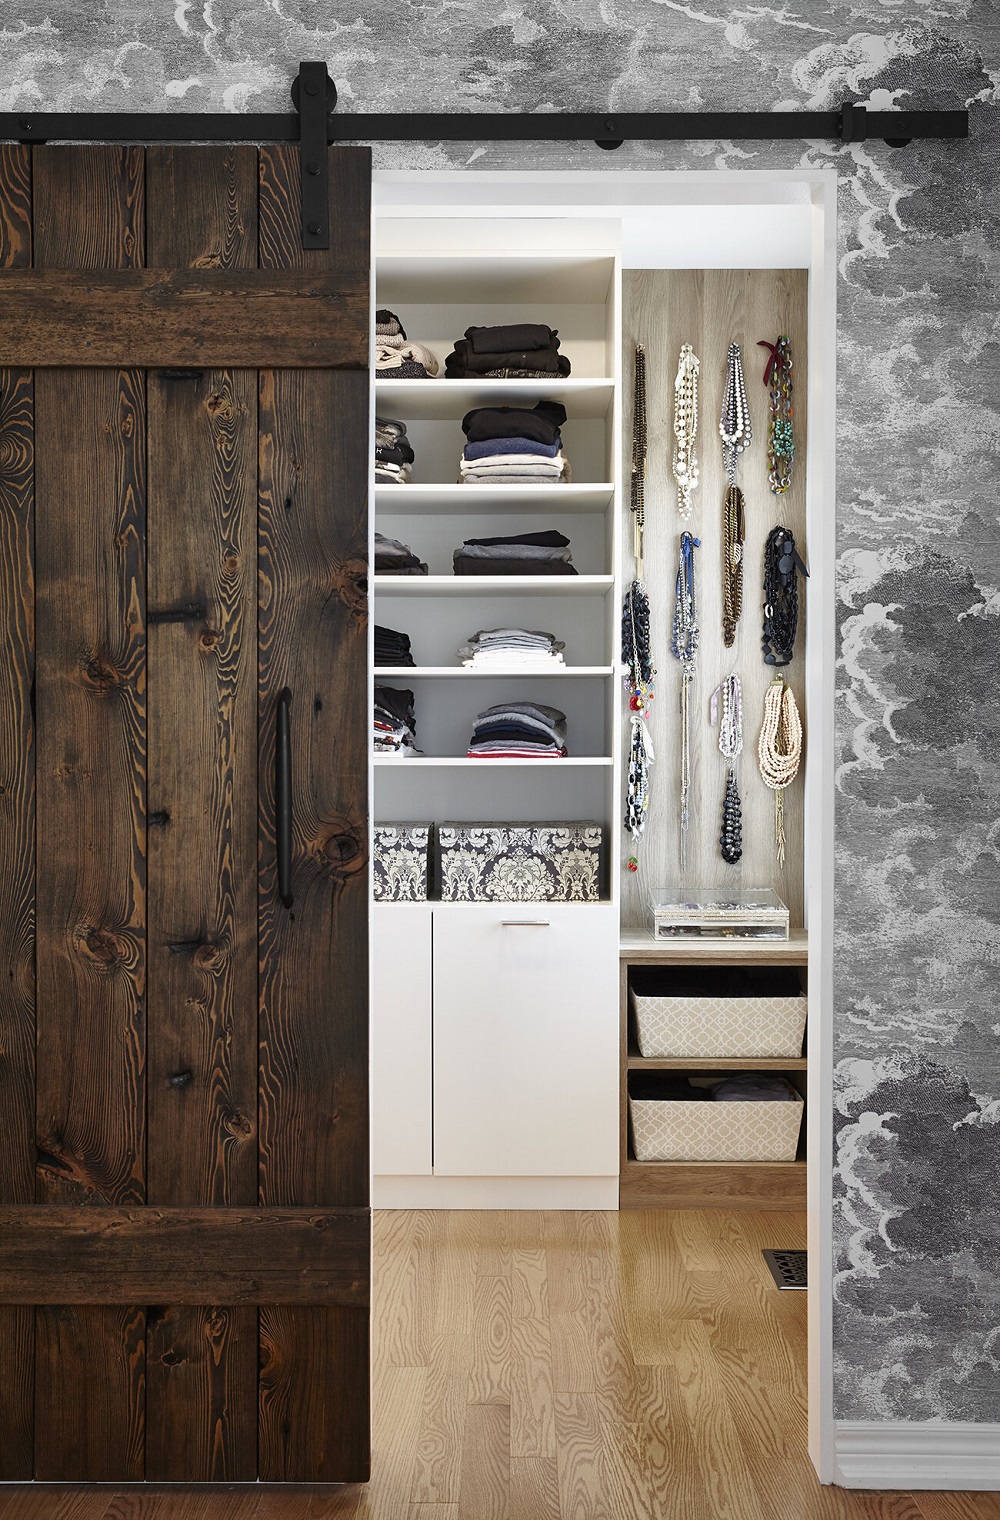 wc13-1 Cool walk-in closet ideas you should have in your home